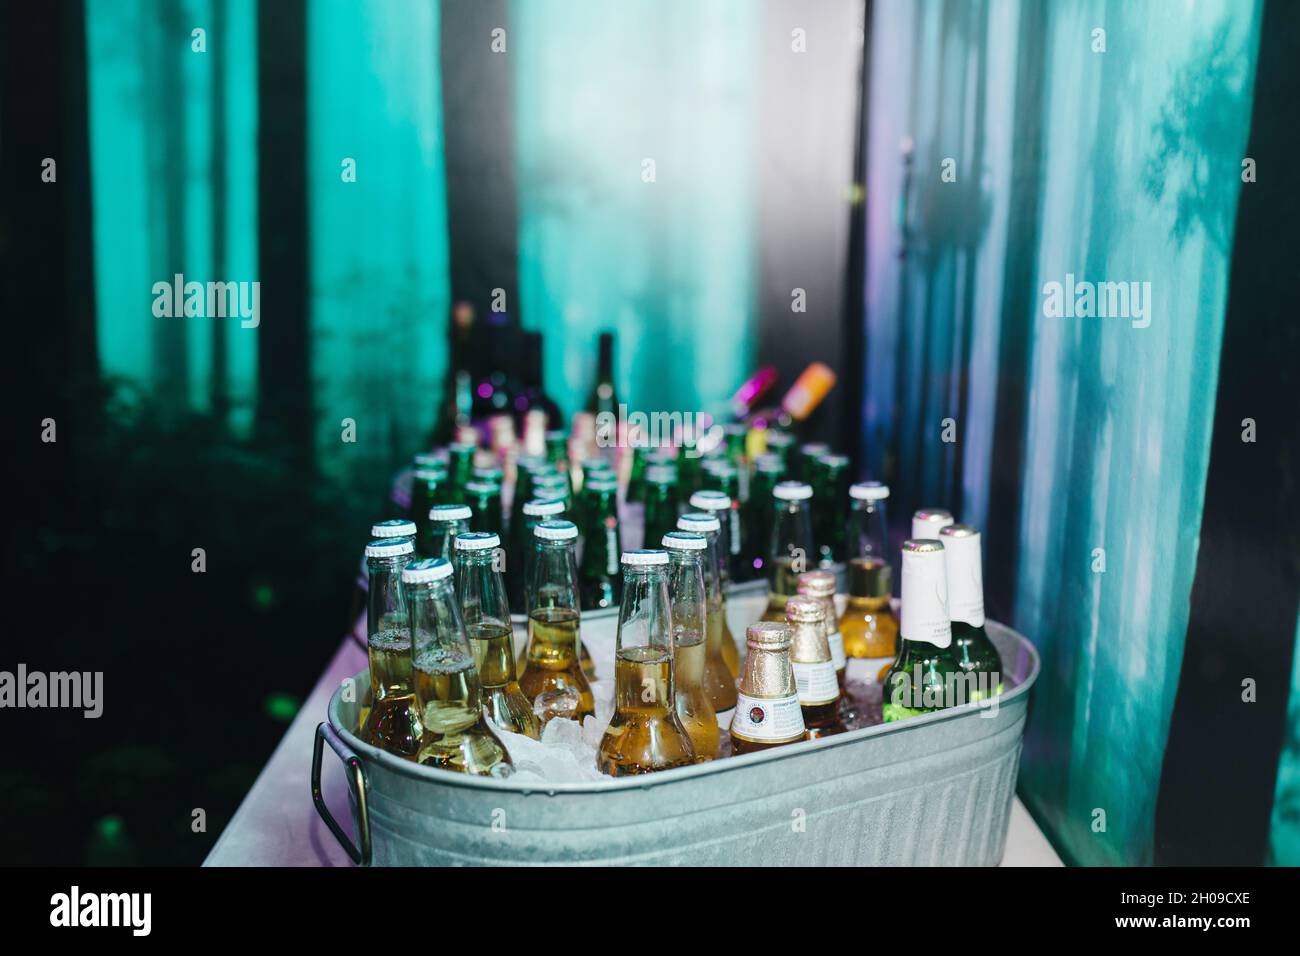 arrangement of beers on ice in metal cooler at night club Stock Photo